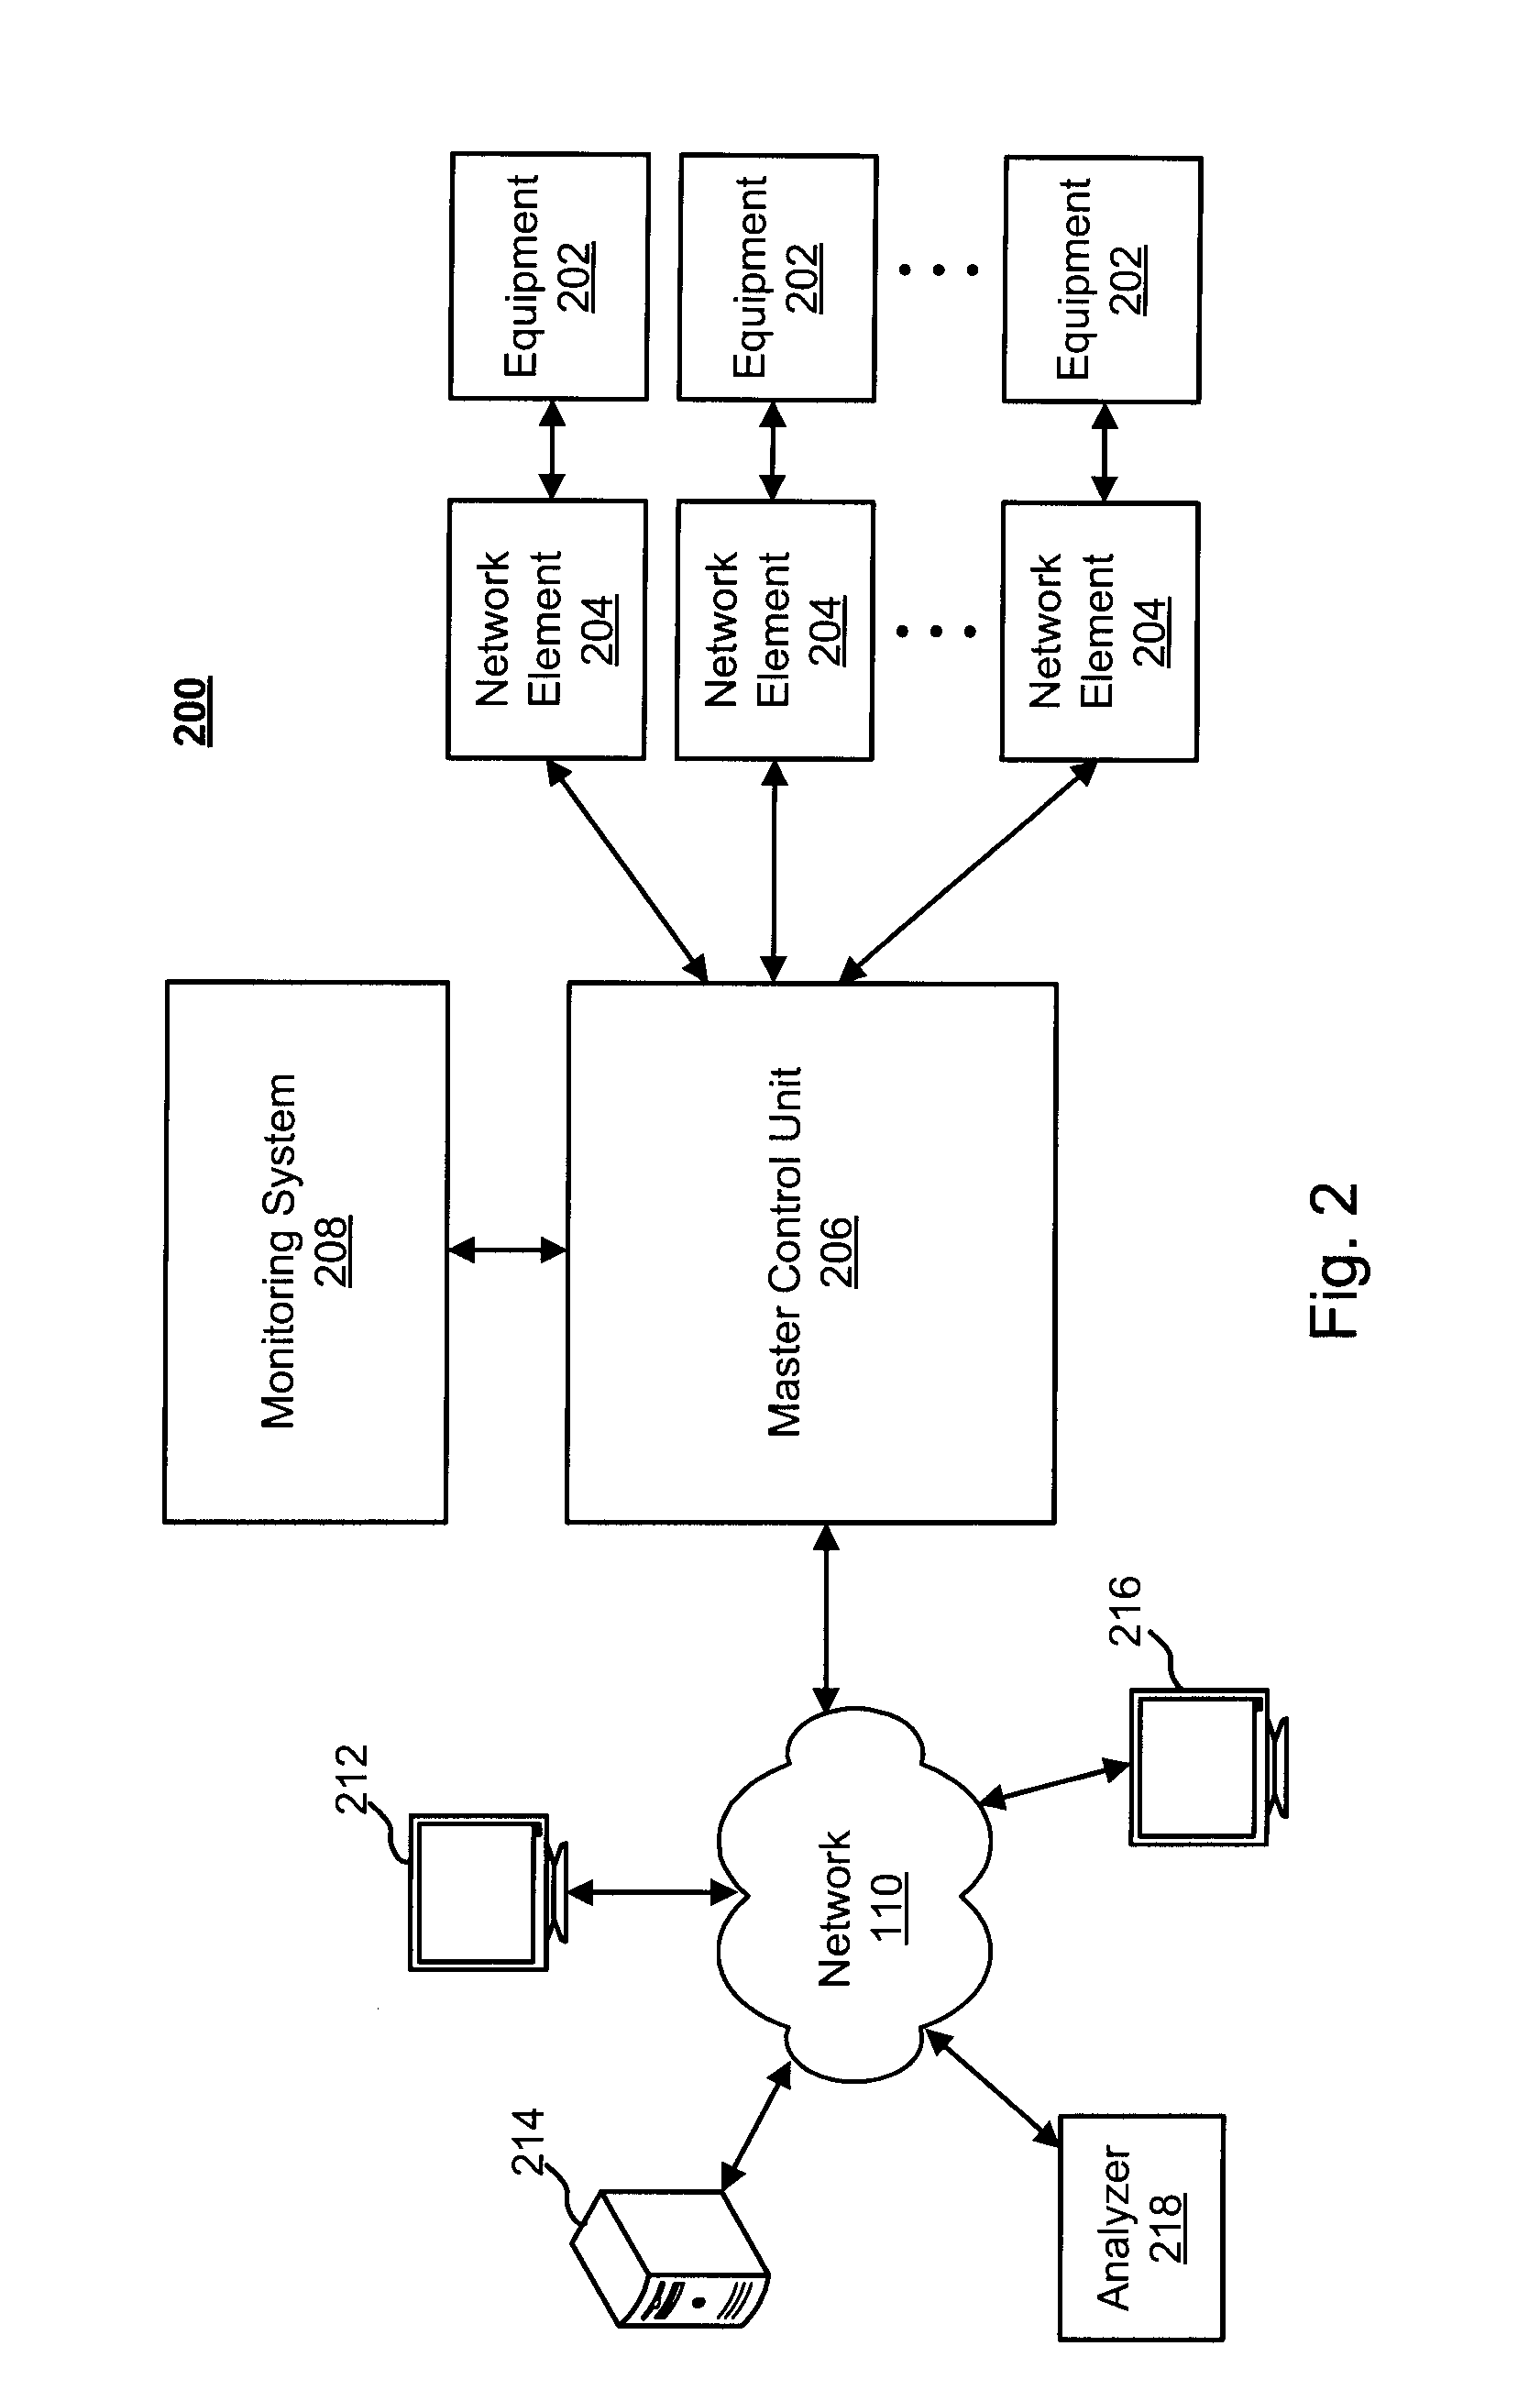 System and method for providing reduced consumption of energy using automated human thermal comfort controls